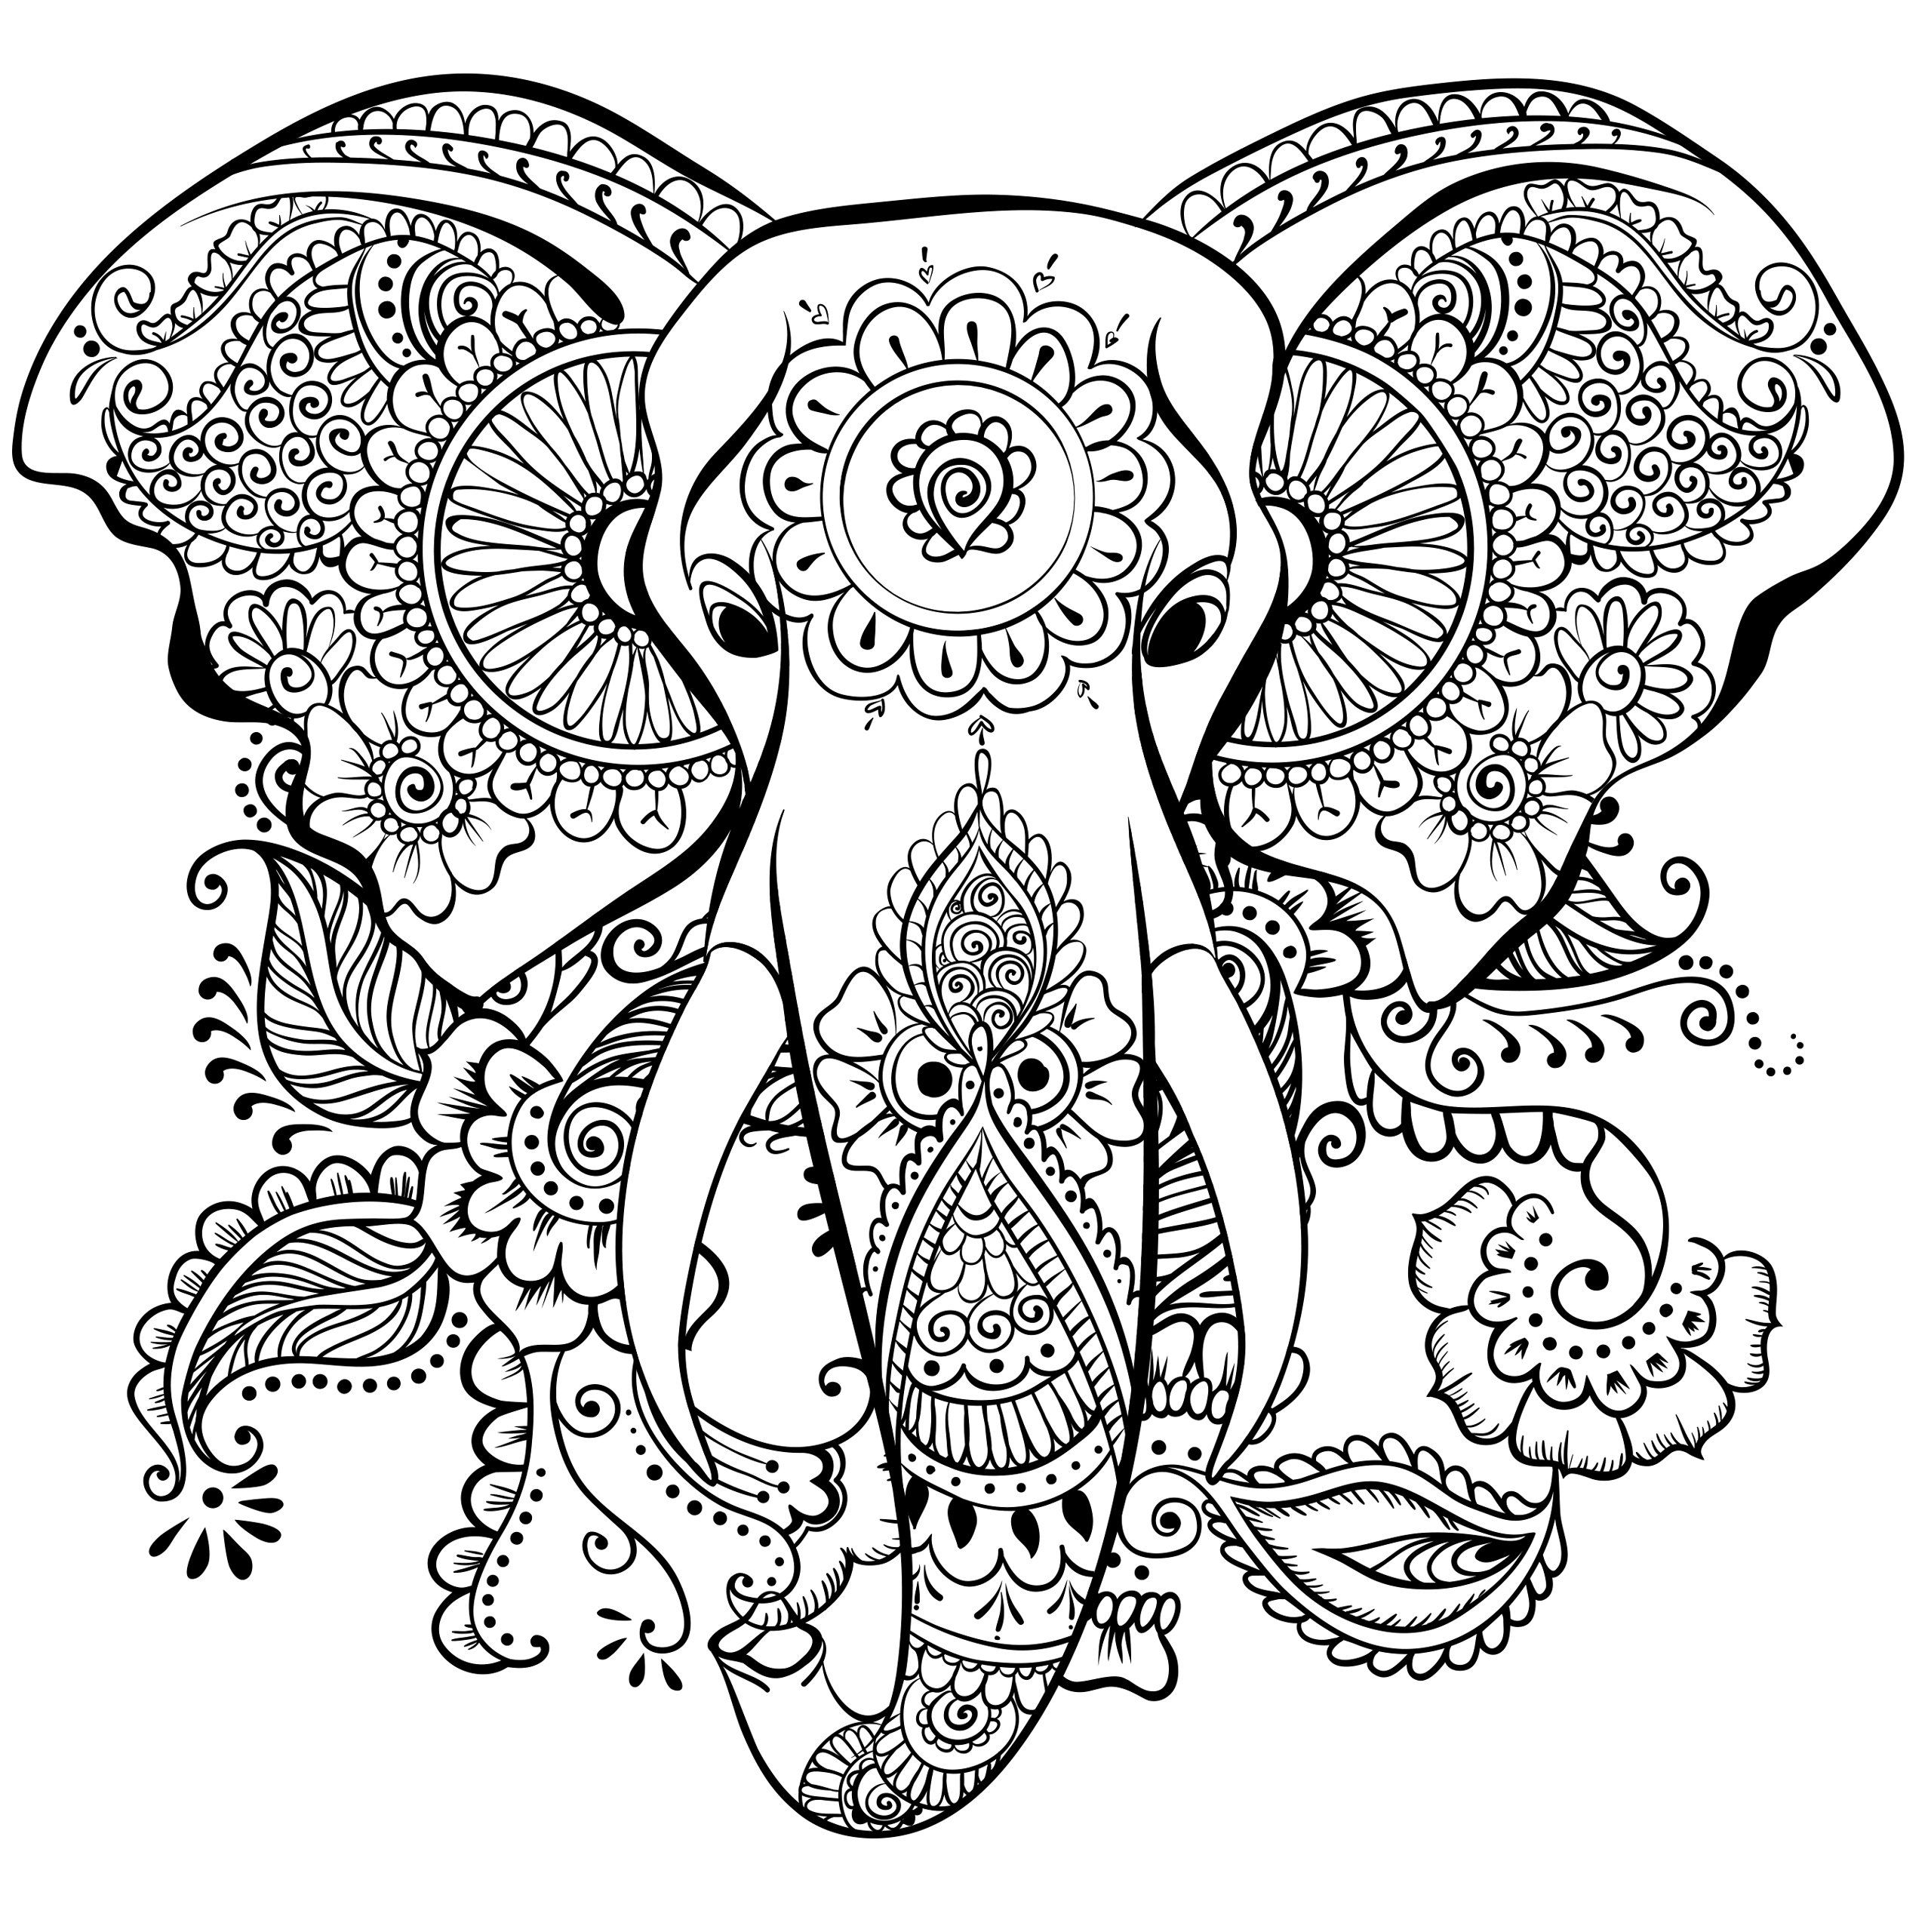 Stress Relief Coloring Pages For Adults at Free printable colorings pages to